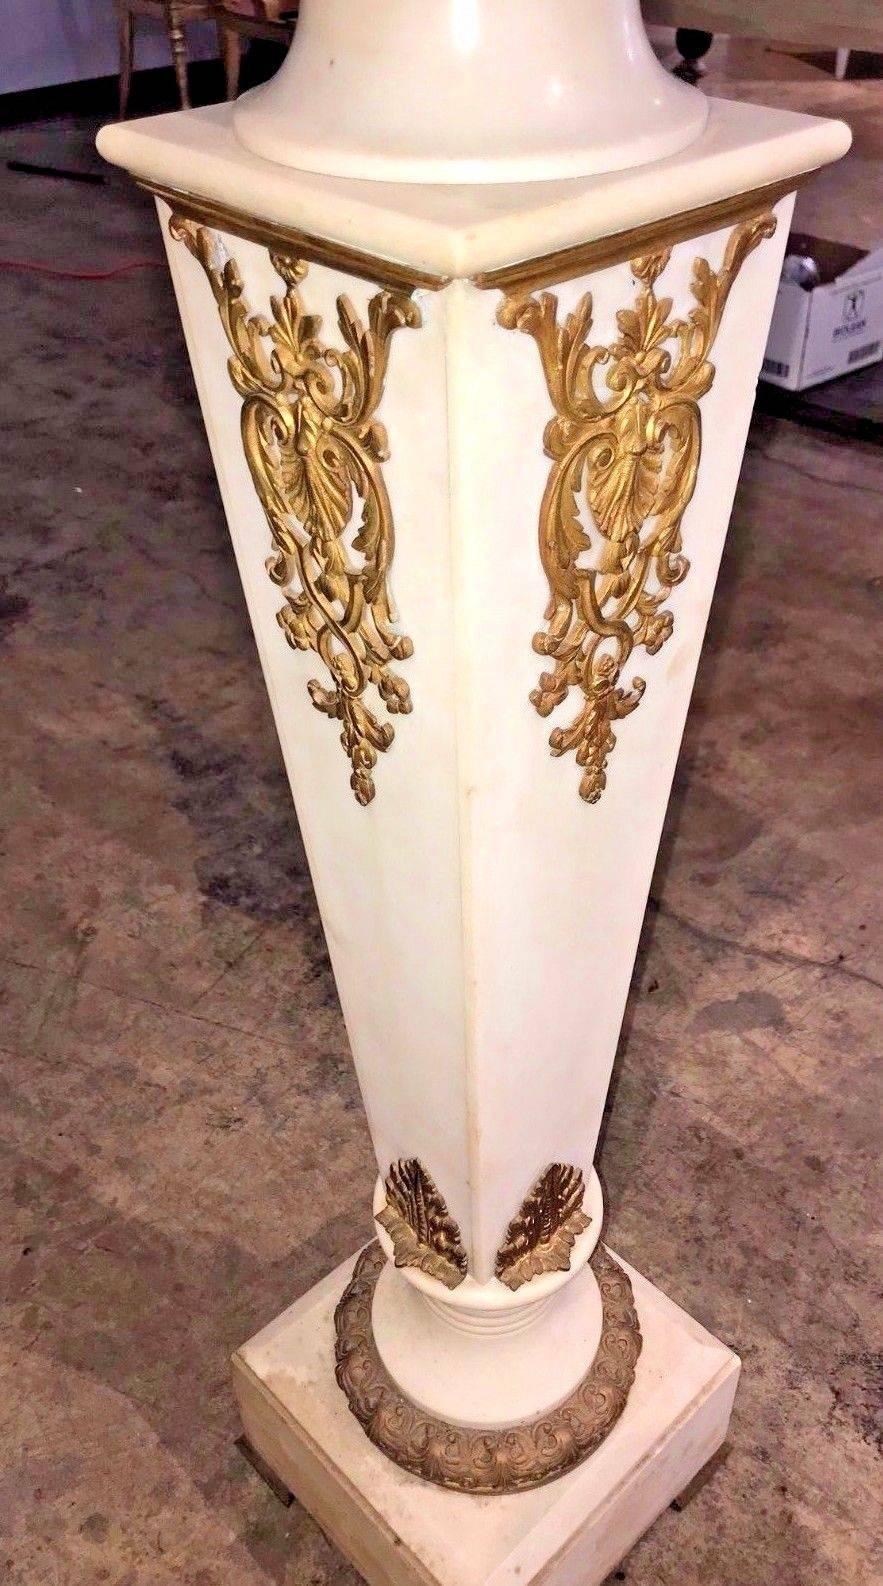 Gorgeous antique Continental white marble and gold-gilded bronze appointed pedestal. 

The square top rests above a highly detailed dore bronze Corinthian style capital and a tapered column adorned with gold-gilded bronze stylized leaf spray and